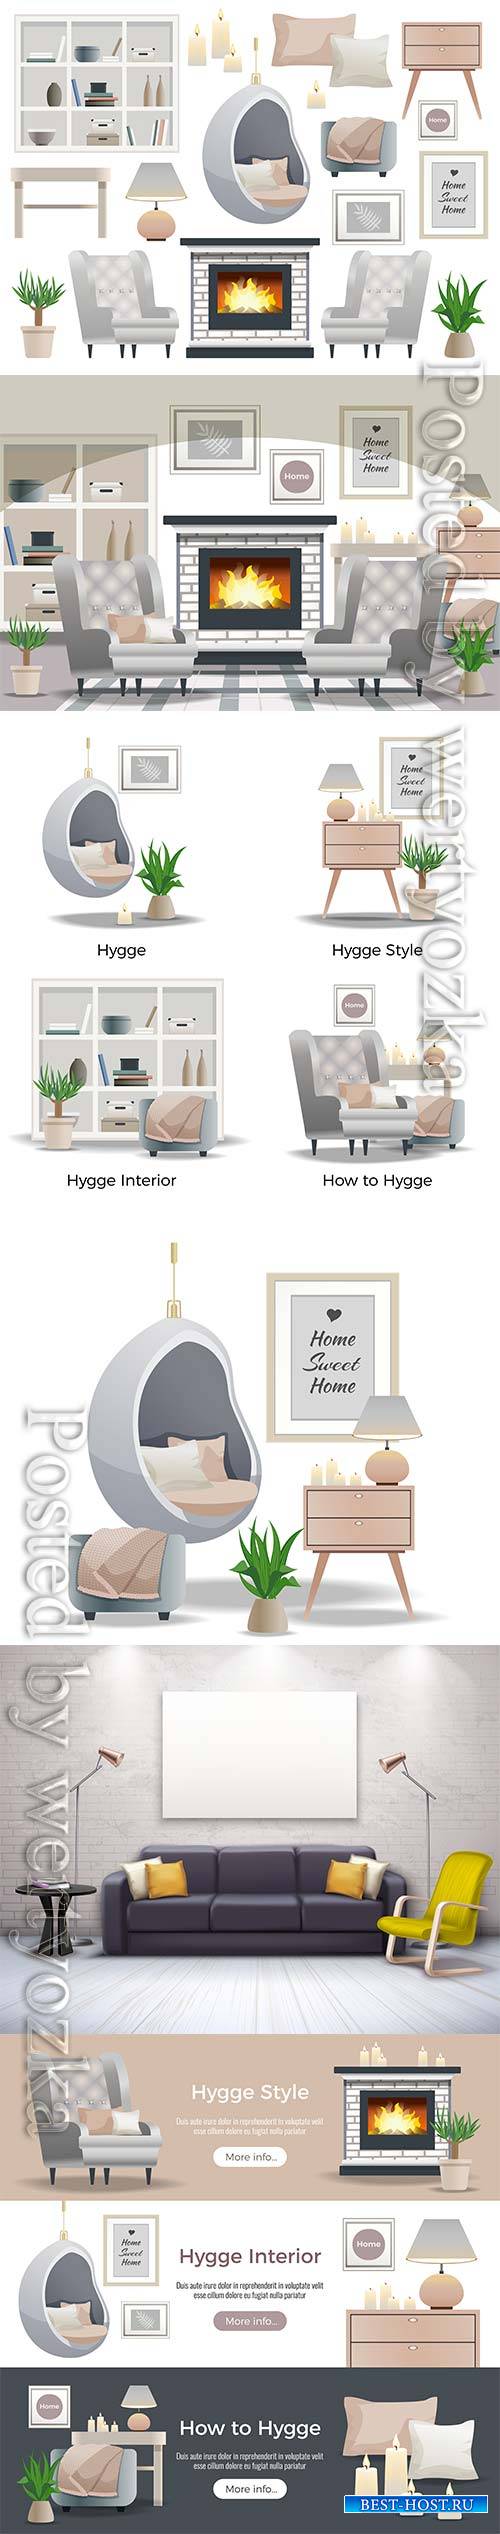 Hygge style interior isometric design element vector collection